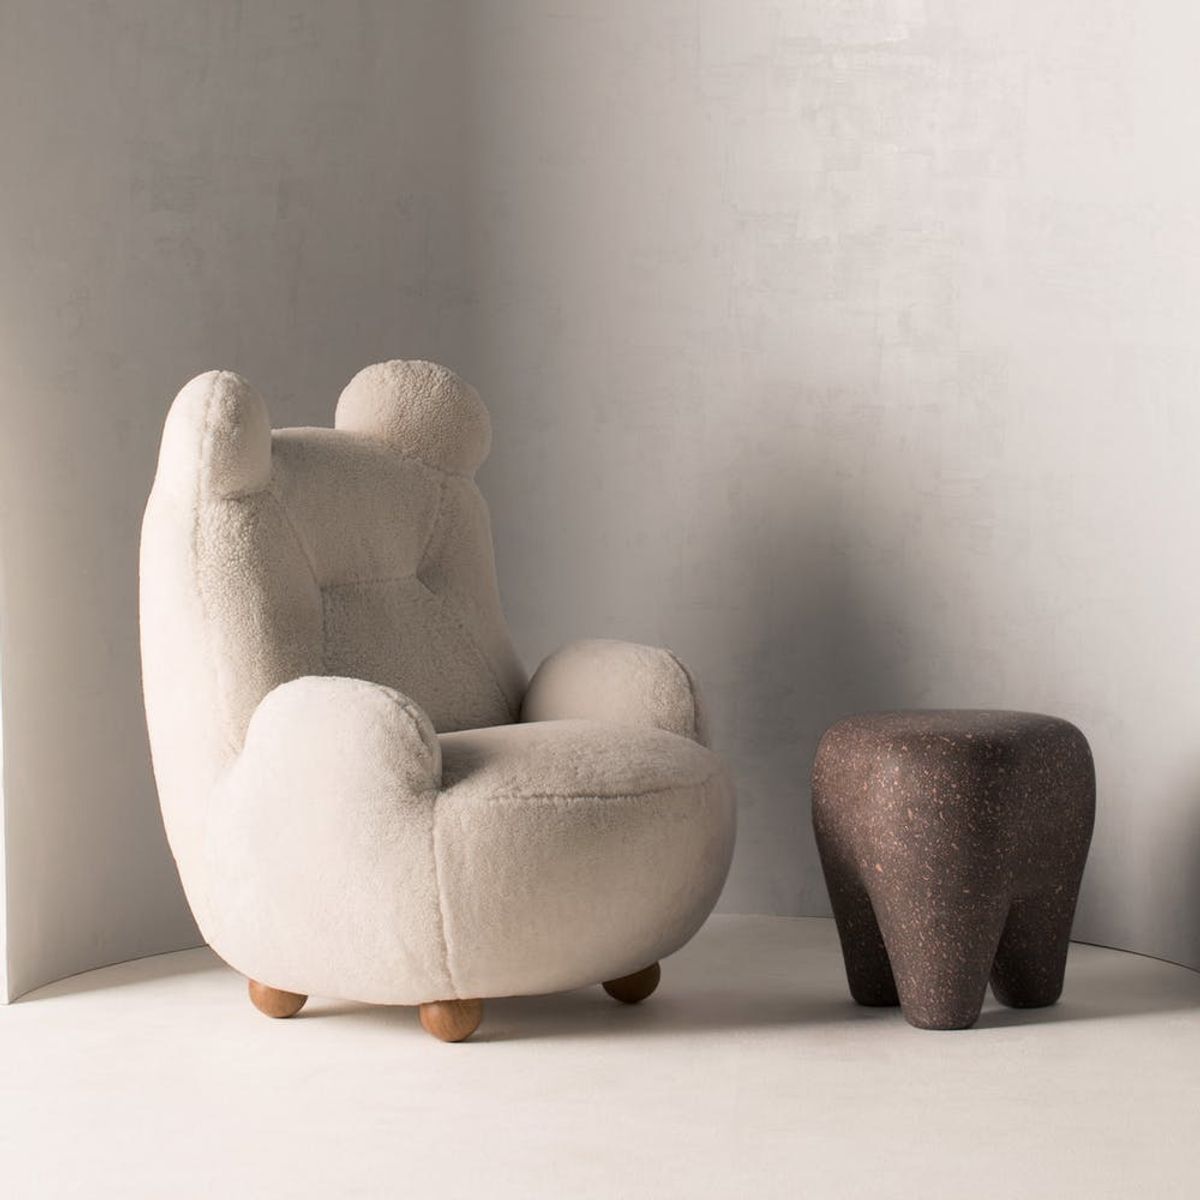 Teddy Bear Chairs Are Exactly What You NEED to Survive This Winter